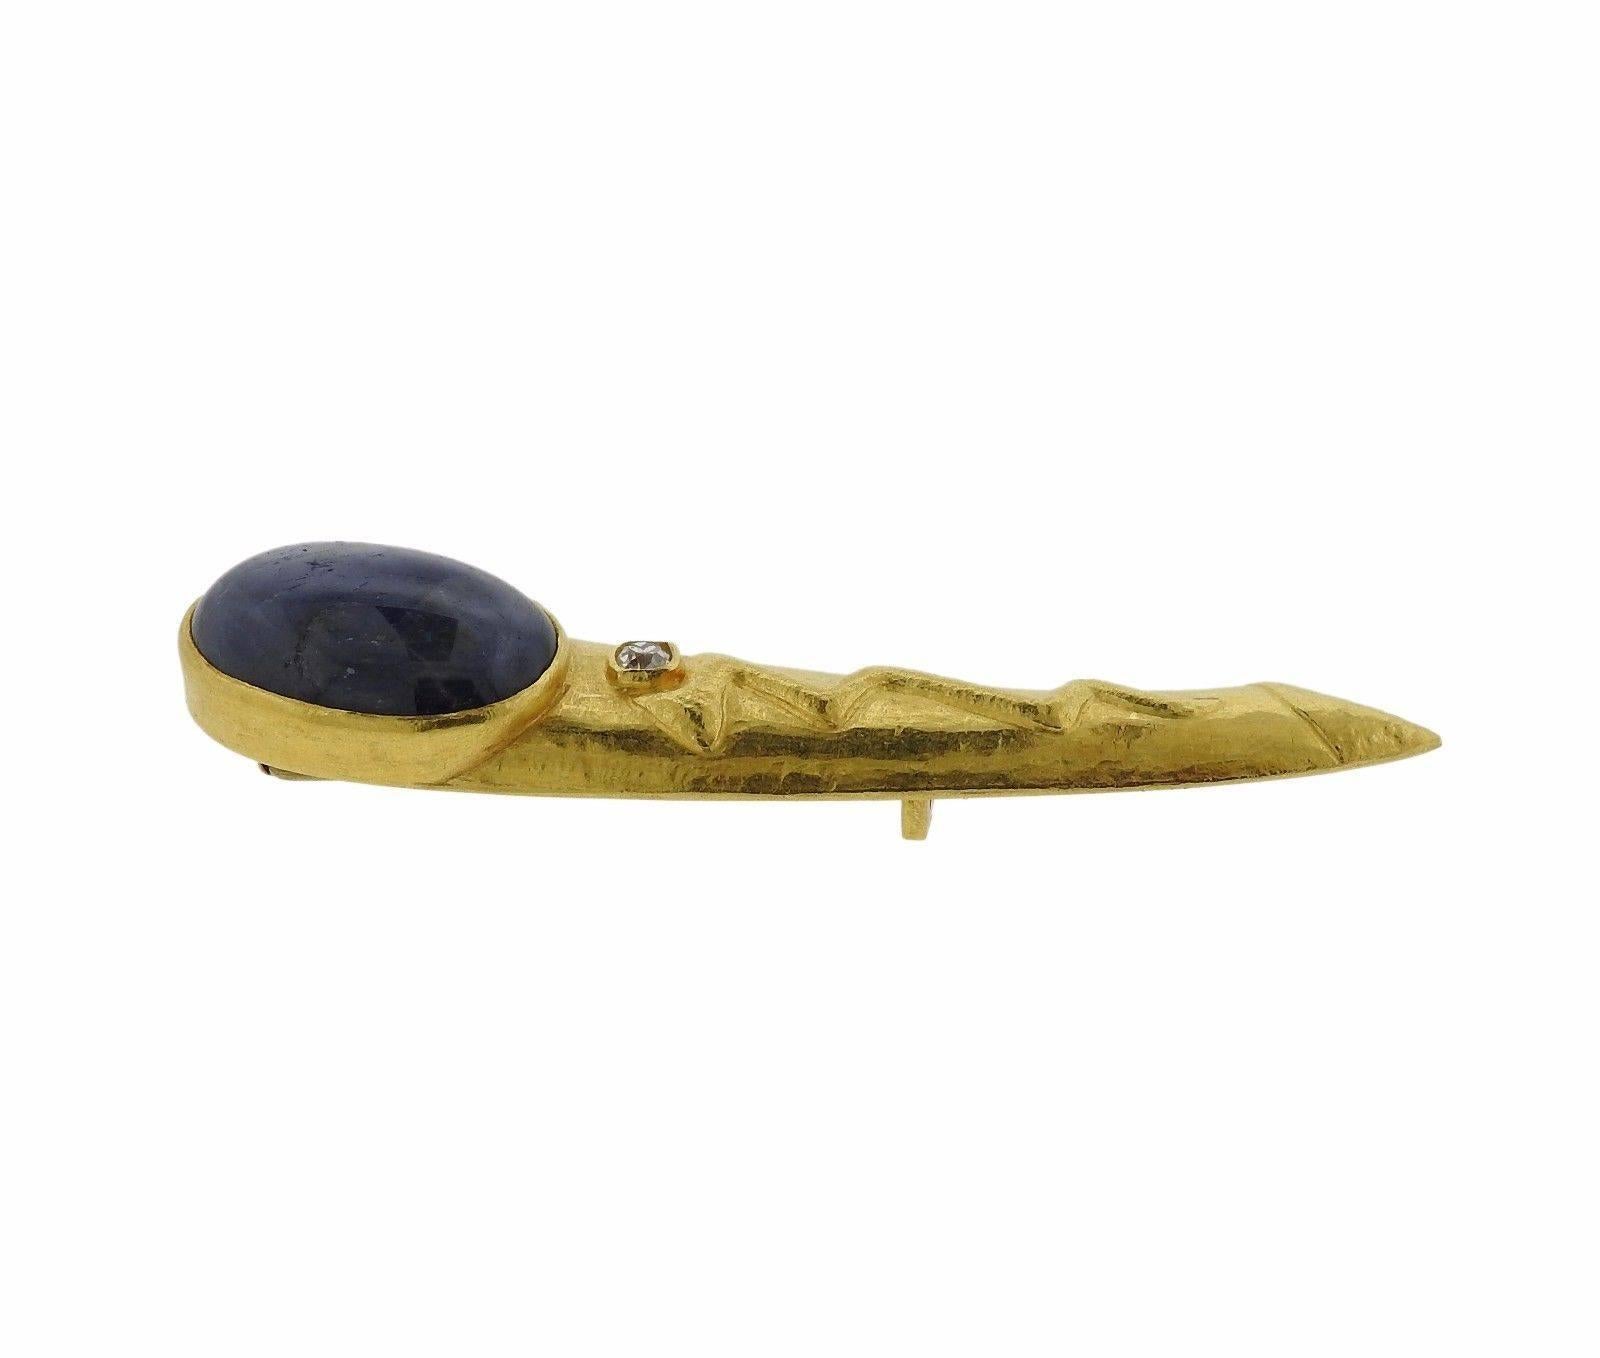 A 22k yellow gold brooch set with a sapphire cabochon (25mm x 18mm) and an old mine cut I/SI diamond weighing approximately 0.25ct.  The brooch measures 84mm x 18mm and weighs 34.4 grams.  Marked: 900, Maker's Hallmark.